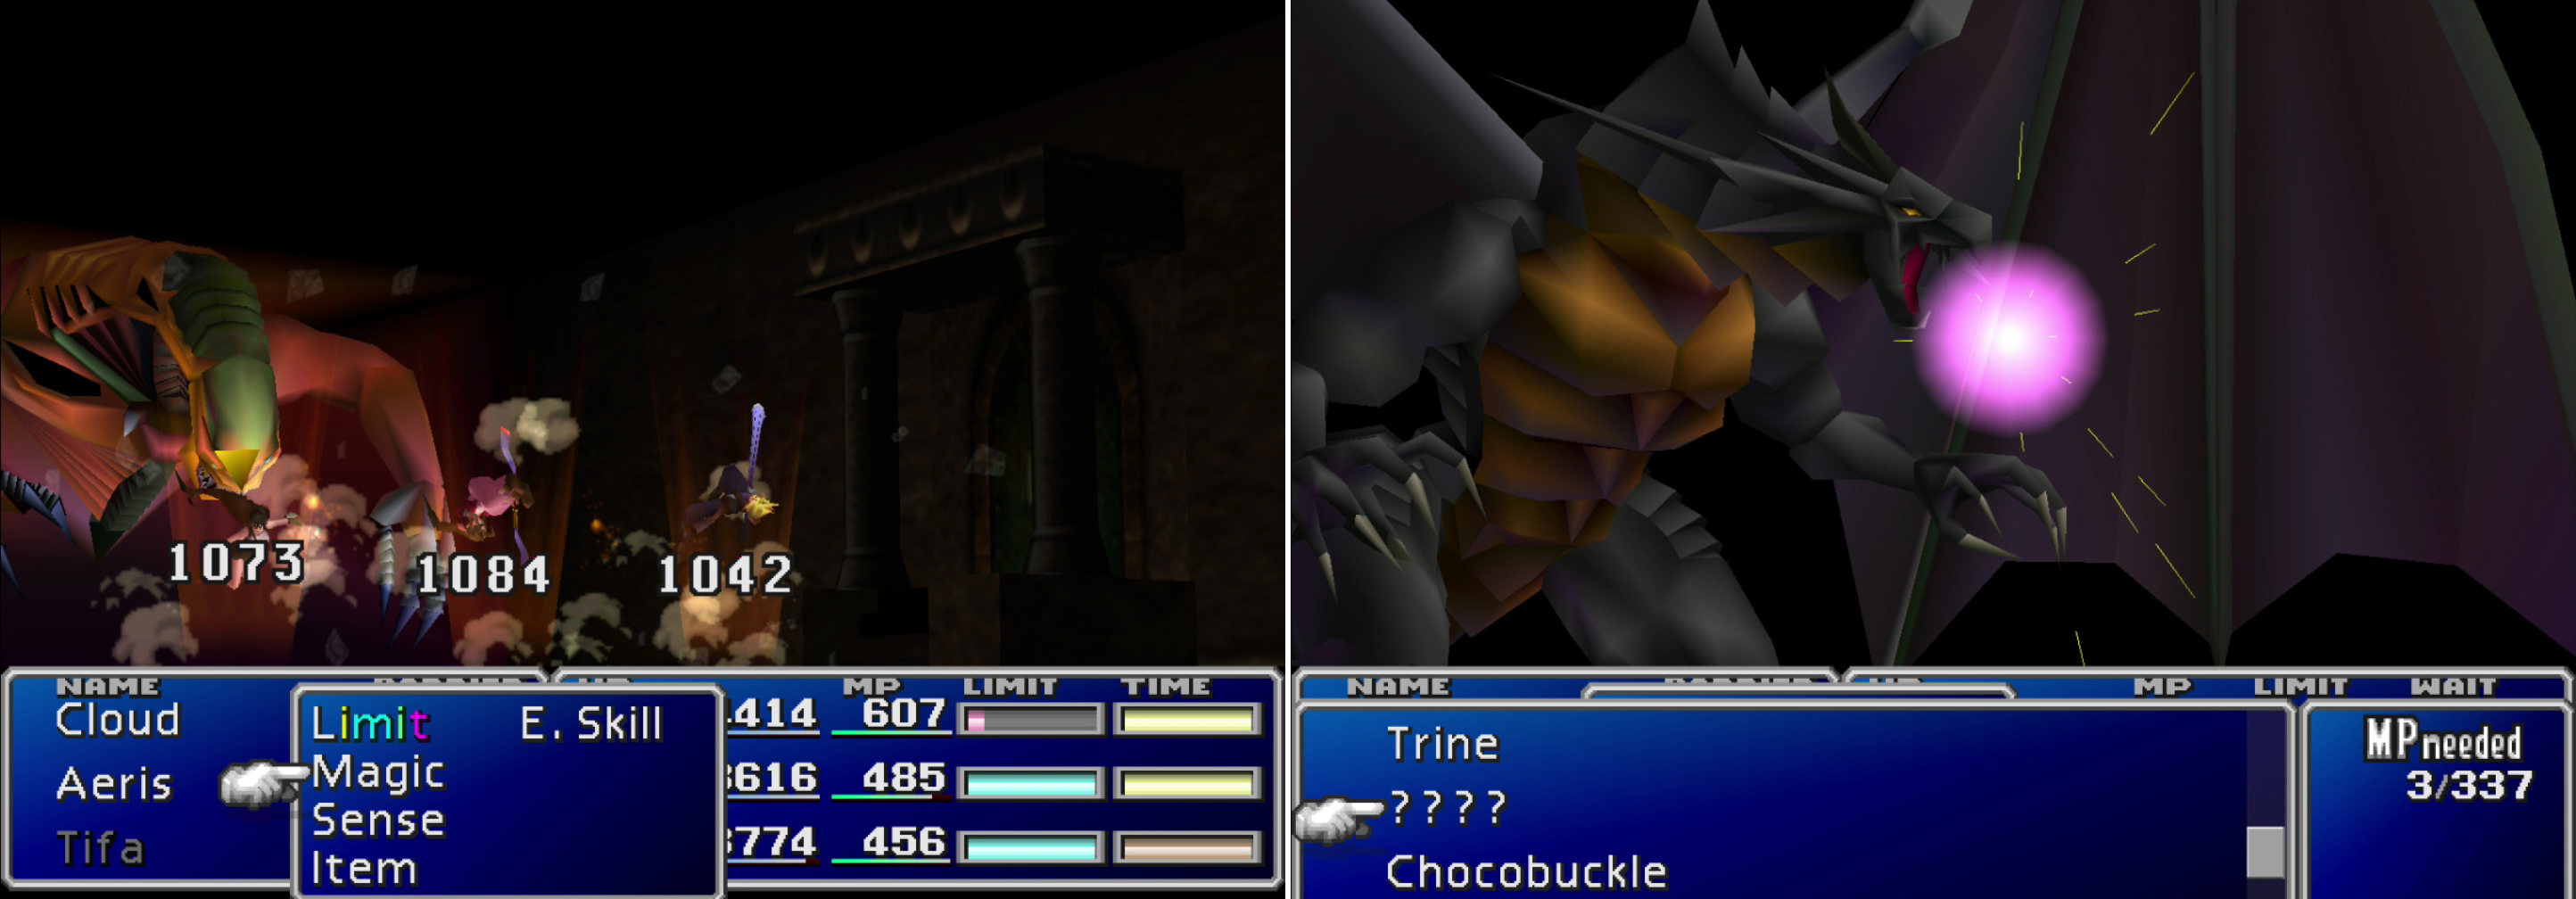 The Demons Gate’s “Demon Rush” attack can deal heavy damage to the entire party (left). Consider employing your new-found Bahamut Materia to shave off a hefty chunk of damage from this boss (right).